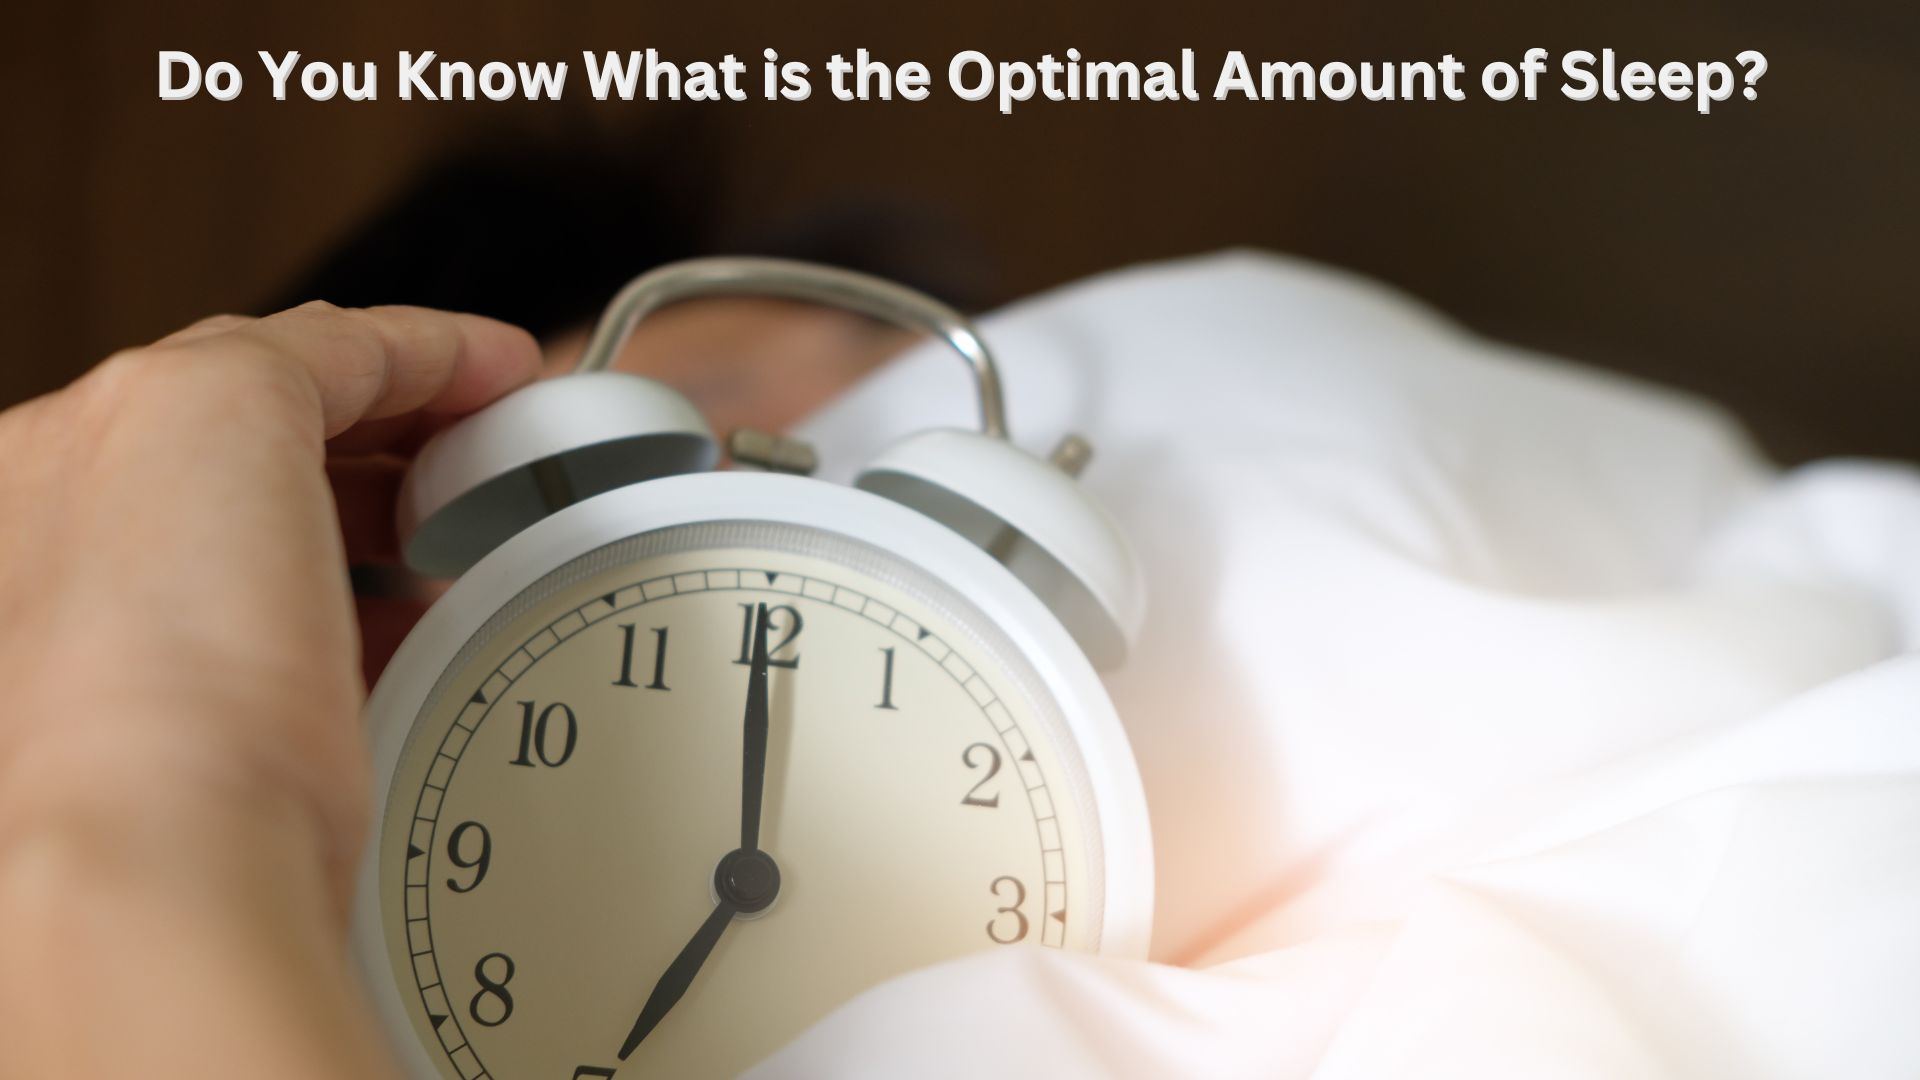 Do You Know What is the Optimal Amount of Sleep?